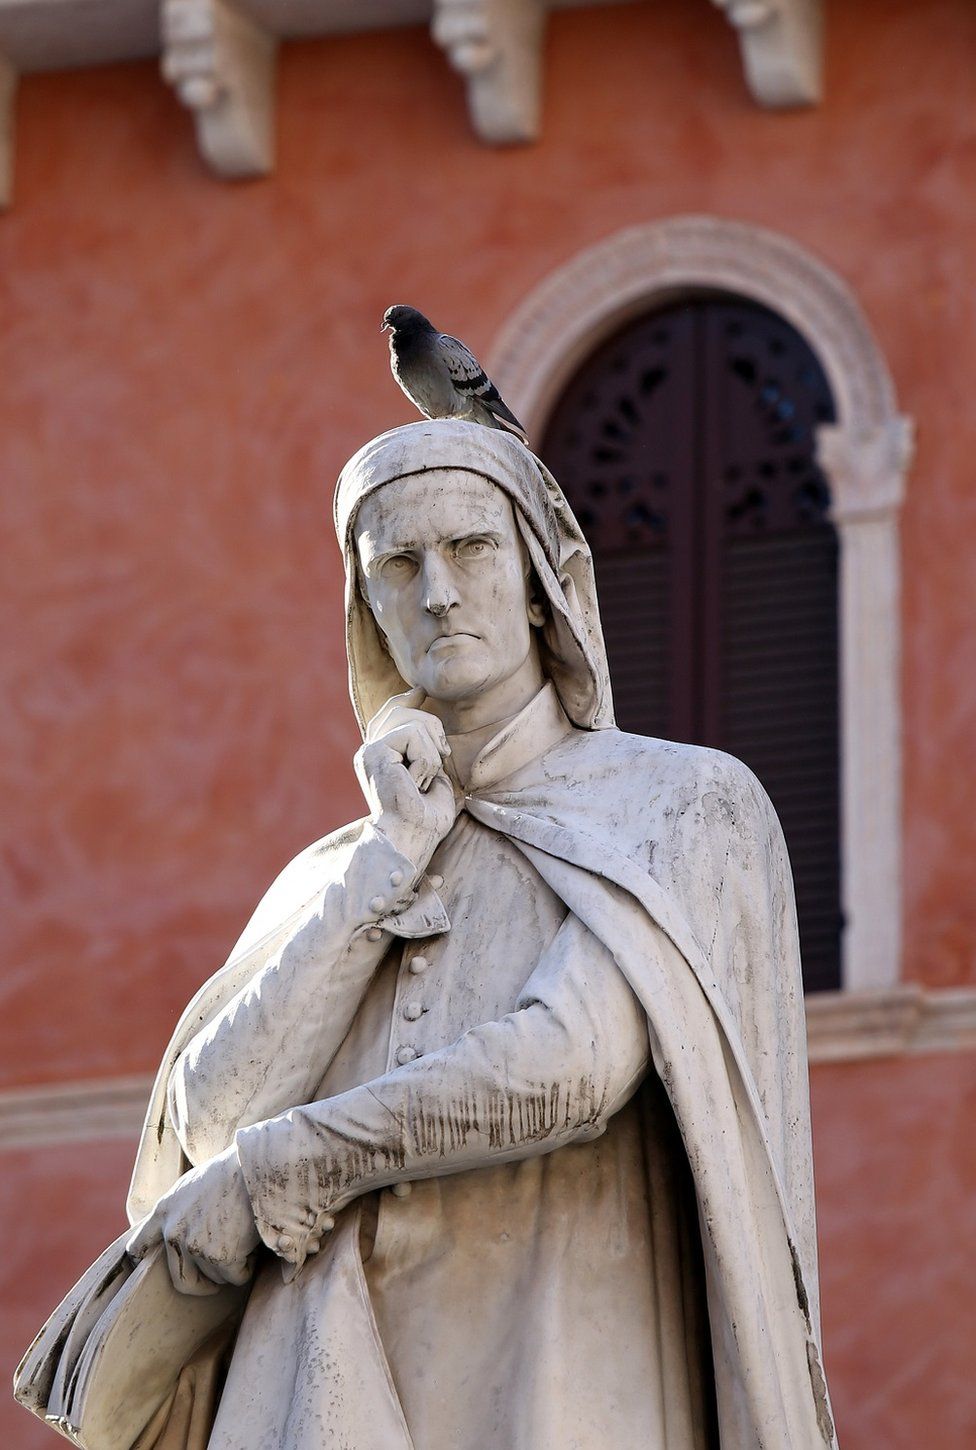 A pigeon on top of a statue